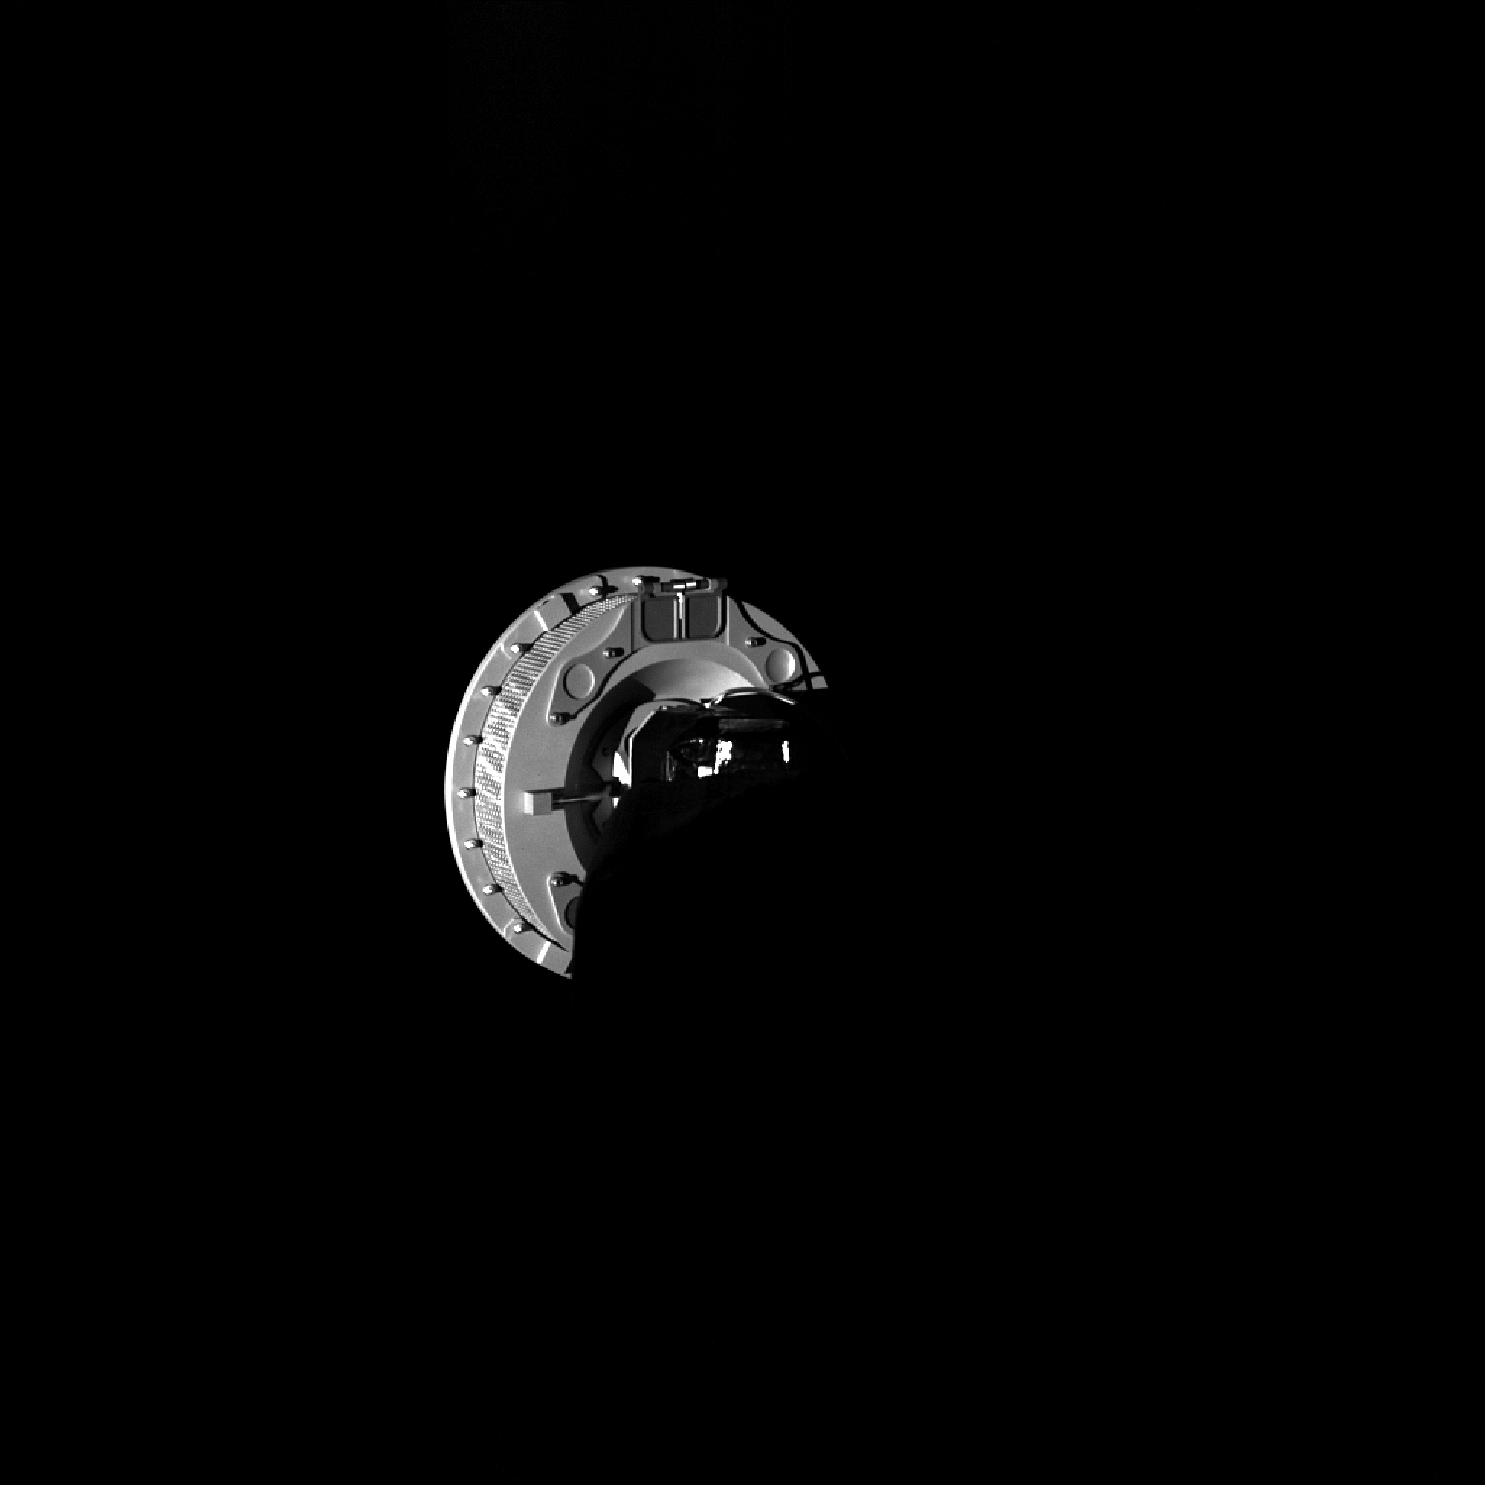 Figure 68: This image shows the OSIRIS-REx TAGSAM sampling head extended from the spacecraft at the end of the TAGSAM arm. The image was obtained by the SamCam camera on 14 November 2018 as part of a visual checkout of the spacecraft’s sample acquisition system. This is a rehearsal image for an observation that will be taken at Bennu during the moment of sample collection to help document the asteroid material collected in the TAGSAM head. There are two witness plate assemblies on the top perimeter of the TAGSAM head, one of which is entirely visible in this image. These witness plates record the deposition of material on the TAGSAM head over the duration of the mission, giving scientists a record of material on the TAGSAM head that is not from Bennu (image credit: NASA/Goddard/University of Arizona)